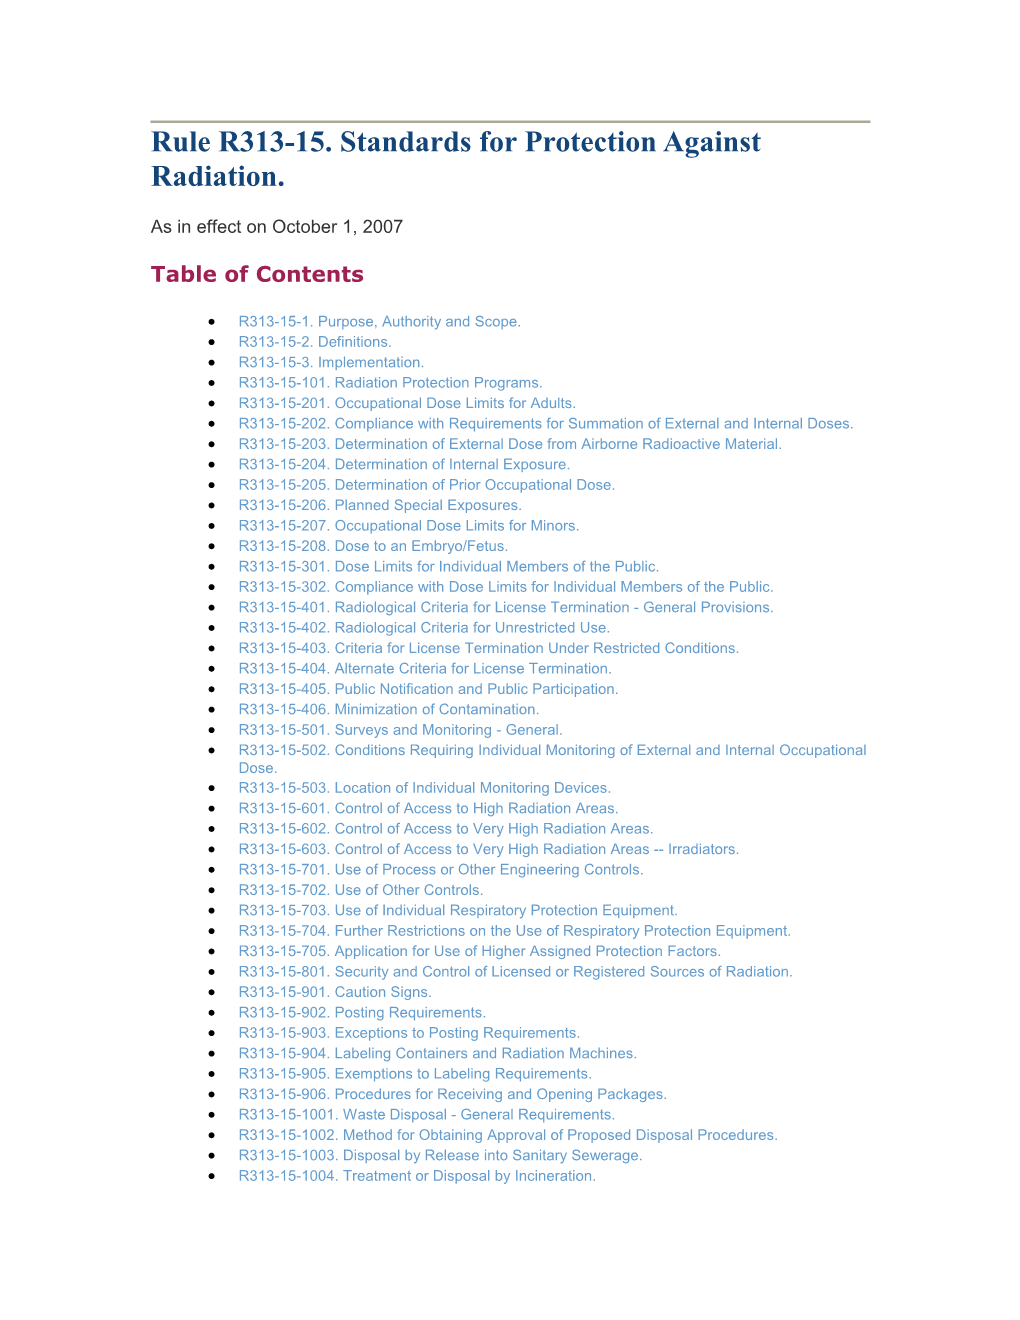 Rule R313-15. Standards for Protection Against Radiation